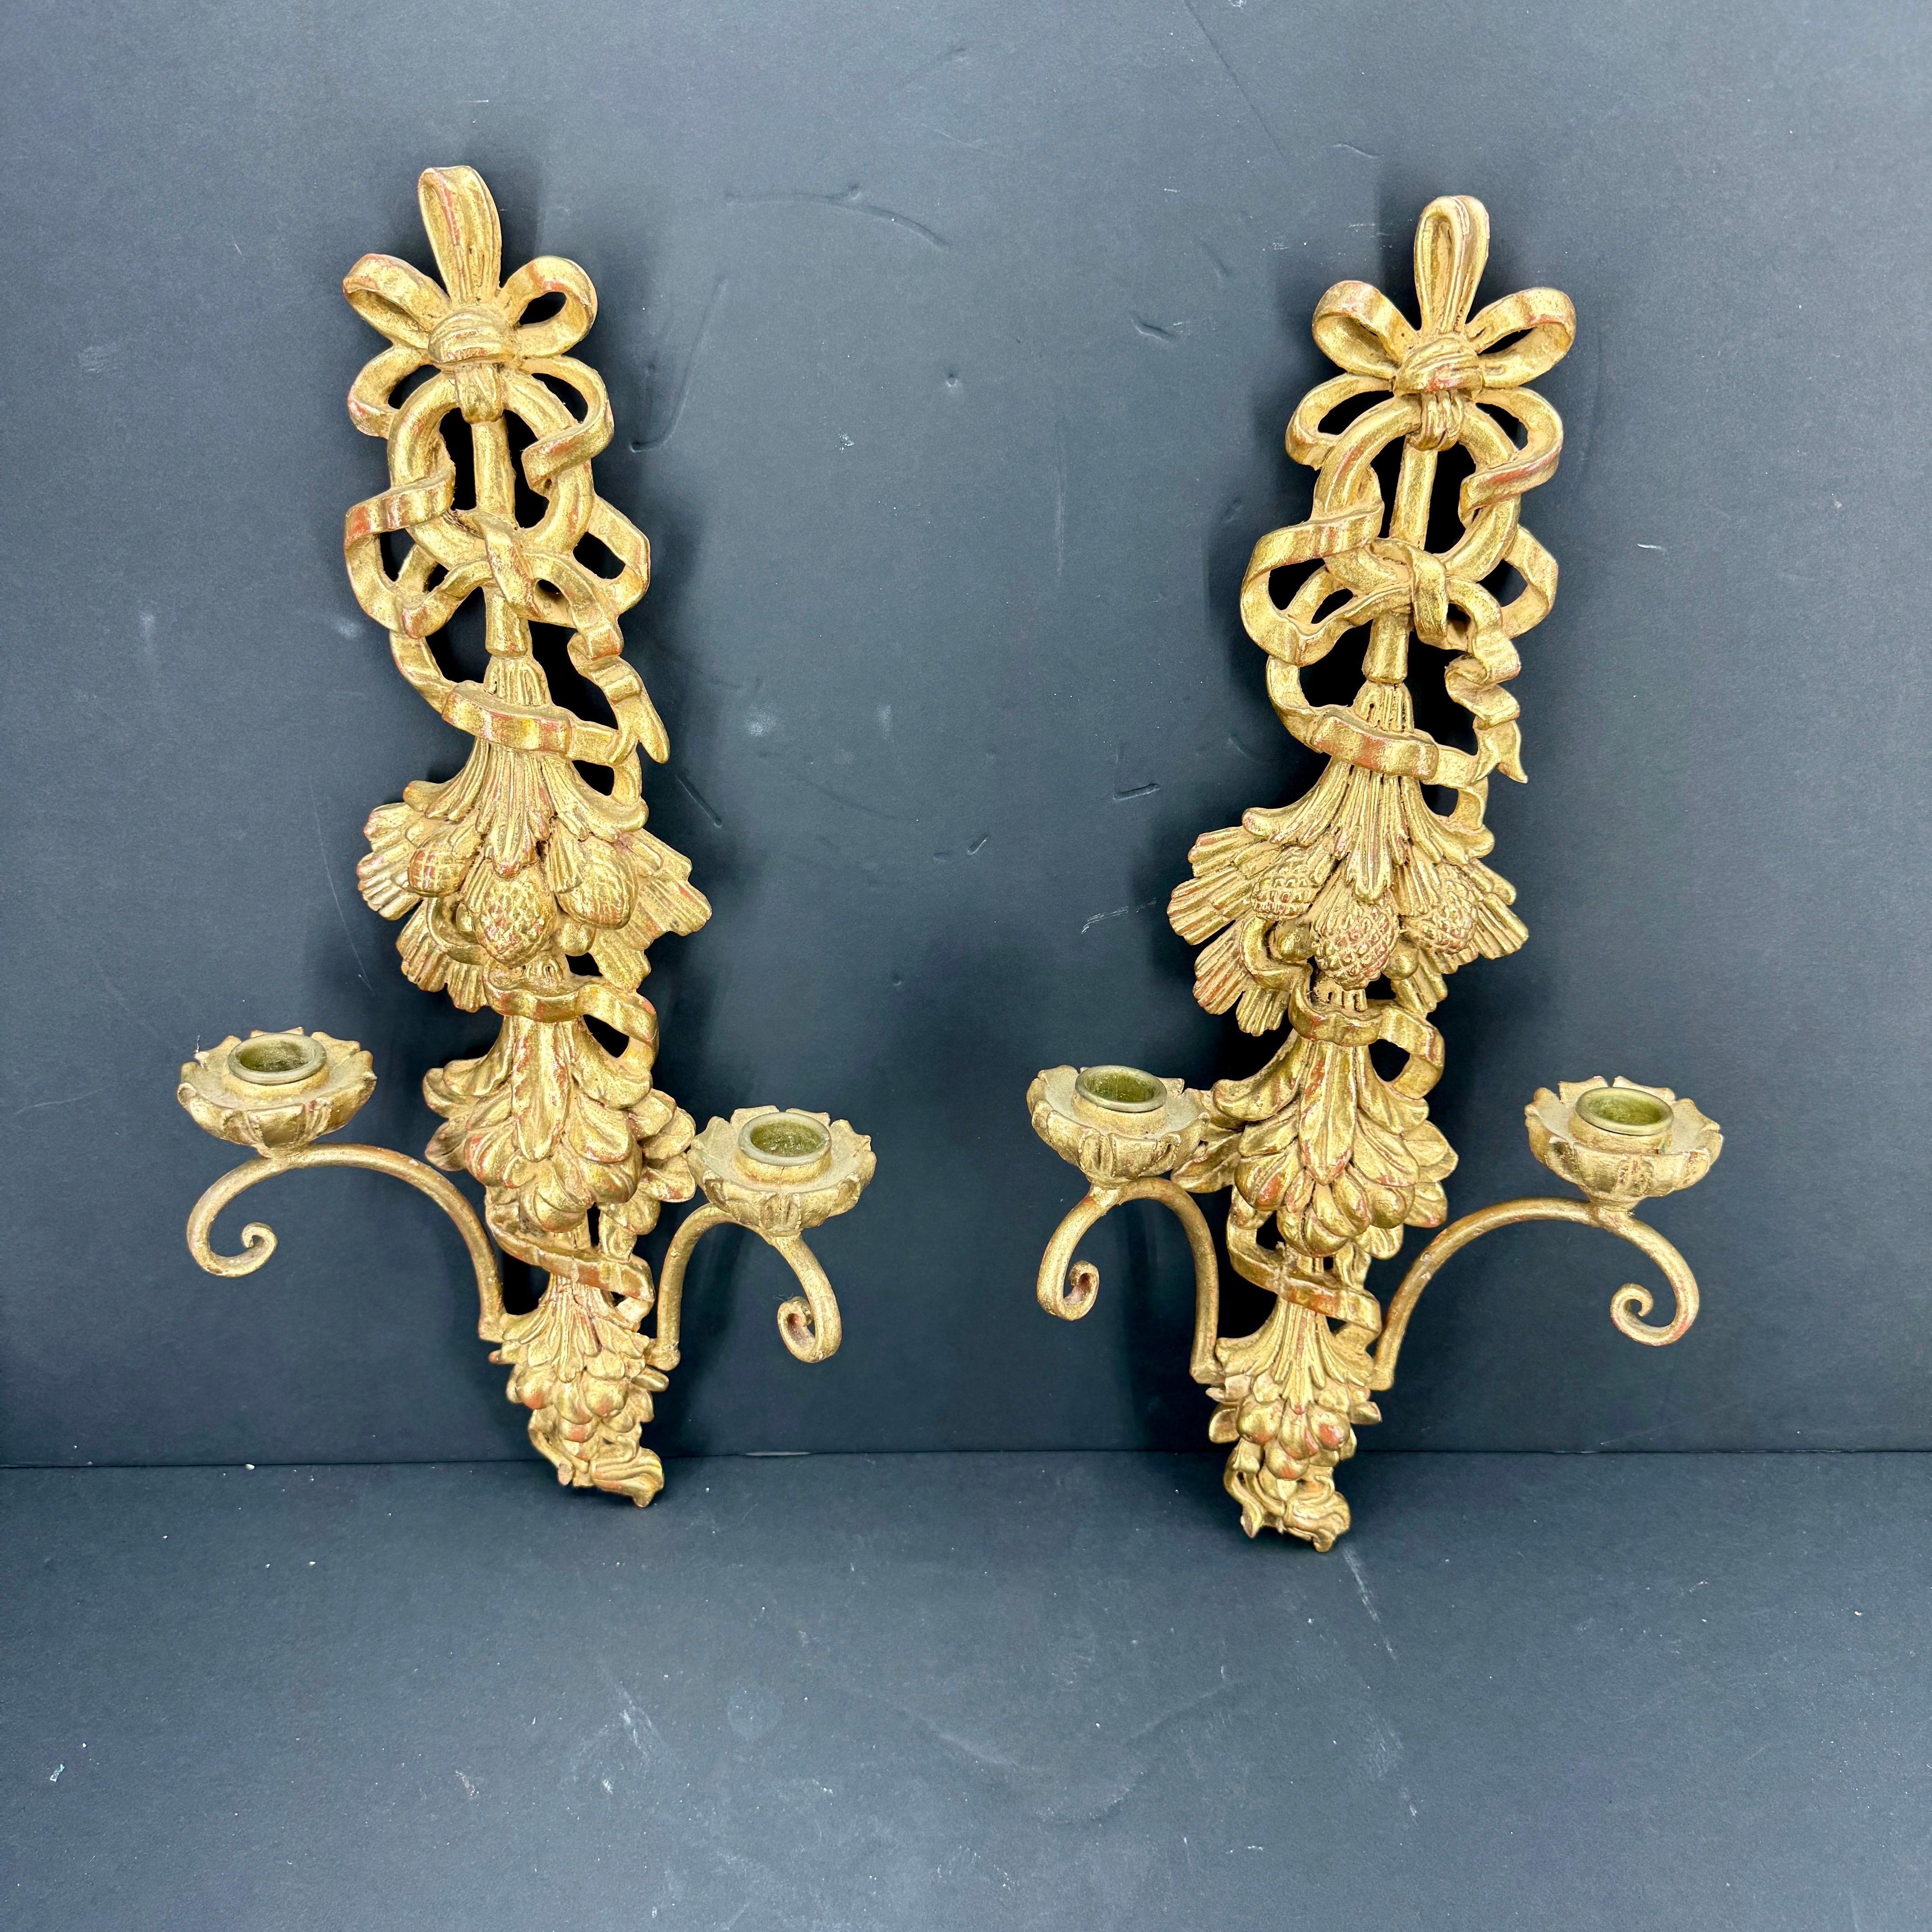 Pair of Italian Louis XVI Giltwood Wall Sconces Appliques In Good Condition For Sale In Haddonfield, NJ